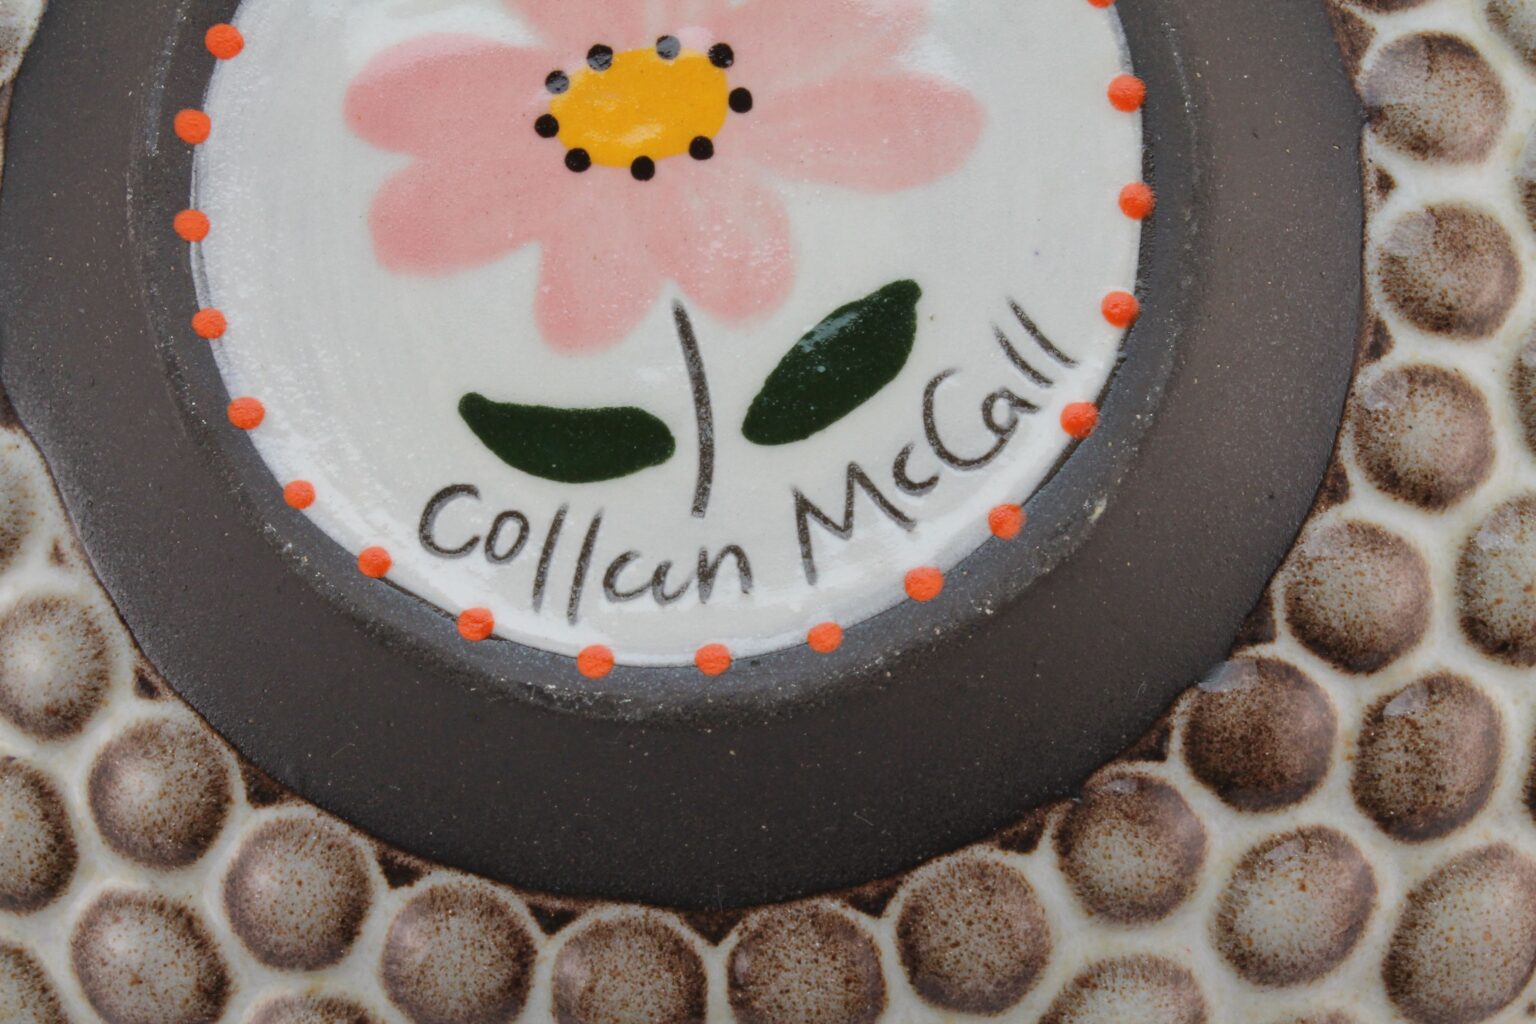 Made by Colleen McCall